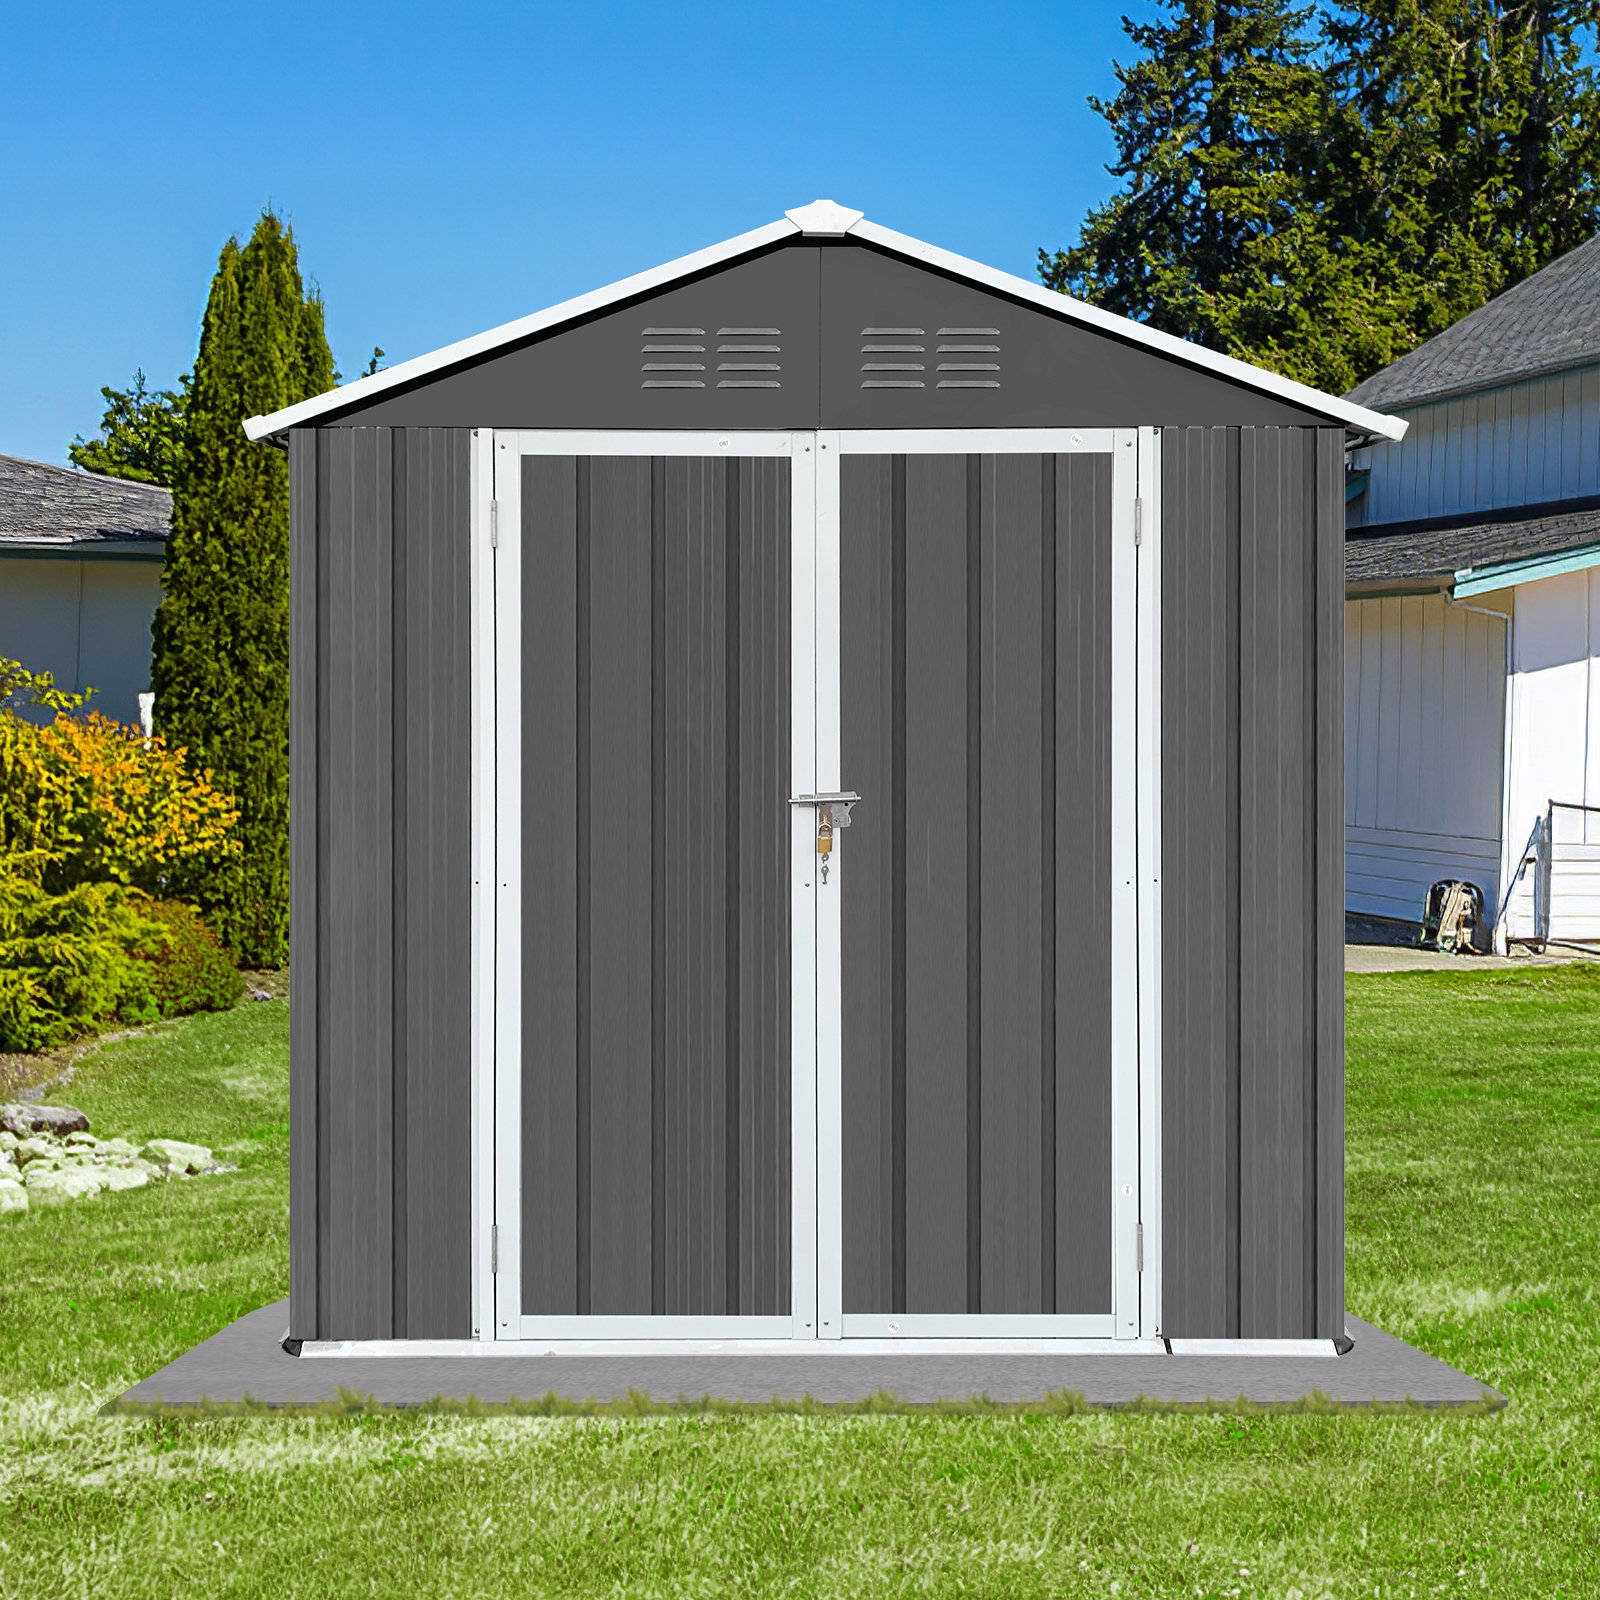 Outdoor Storage Shed 6ft x 4ft, Tool Shed Storage House with Door, Metal Sheds Outdoor Storage Iyofe Siding Color: Gray